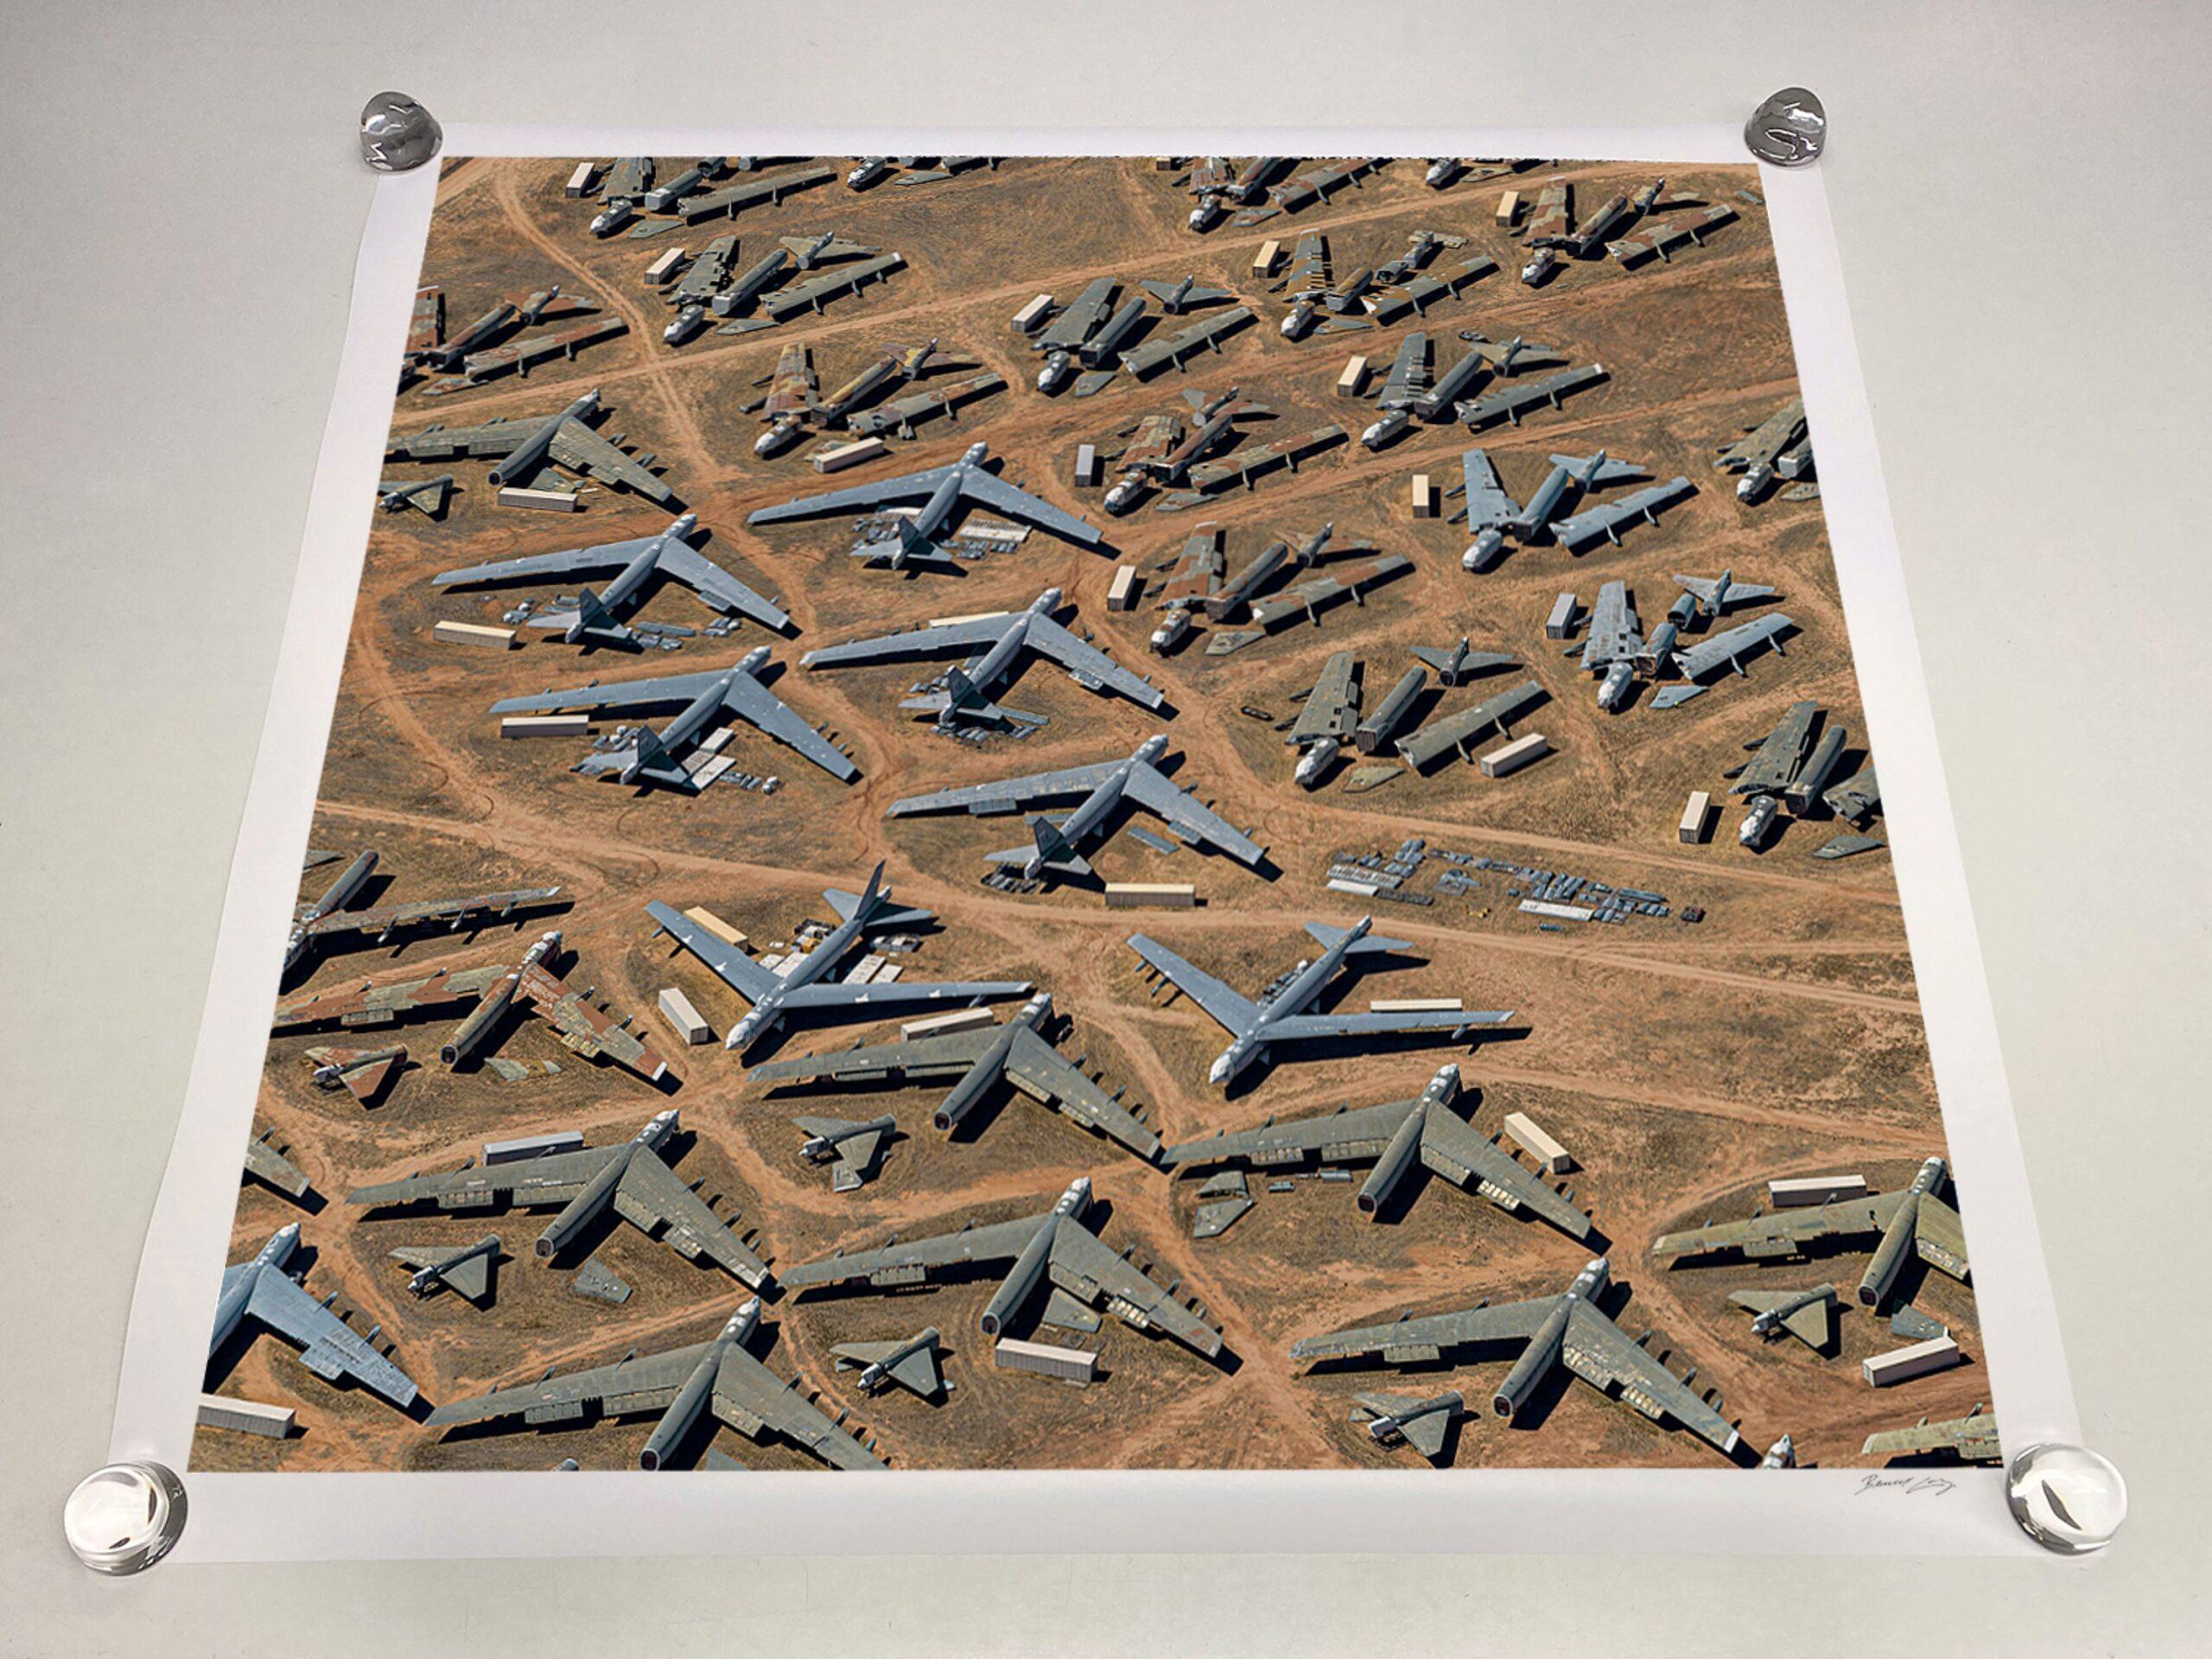 Aerial Views, Boneyard 003 by Bernhard Lang - Aerial photography, planes For Sale 3